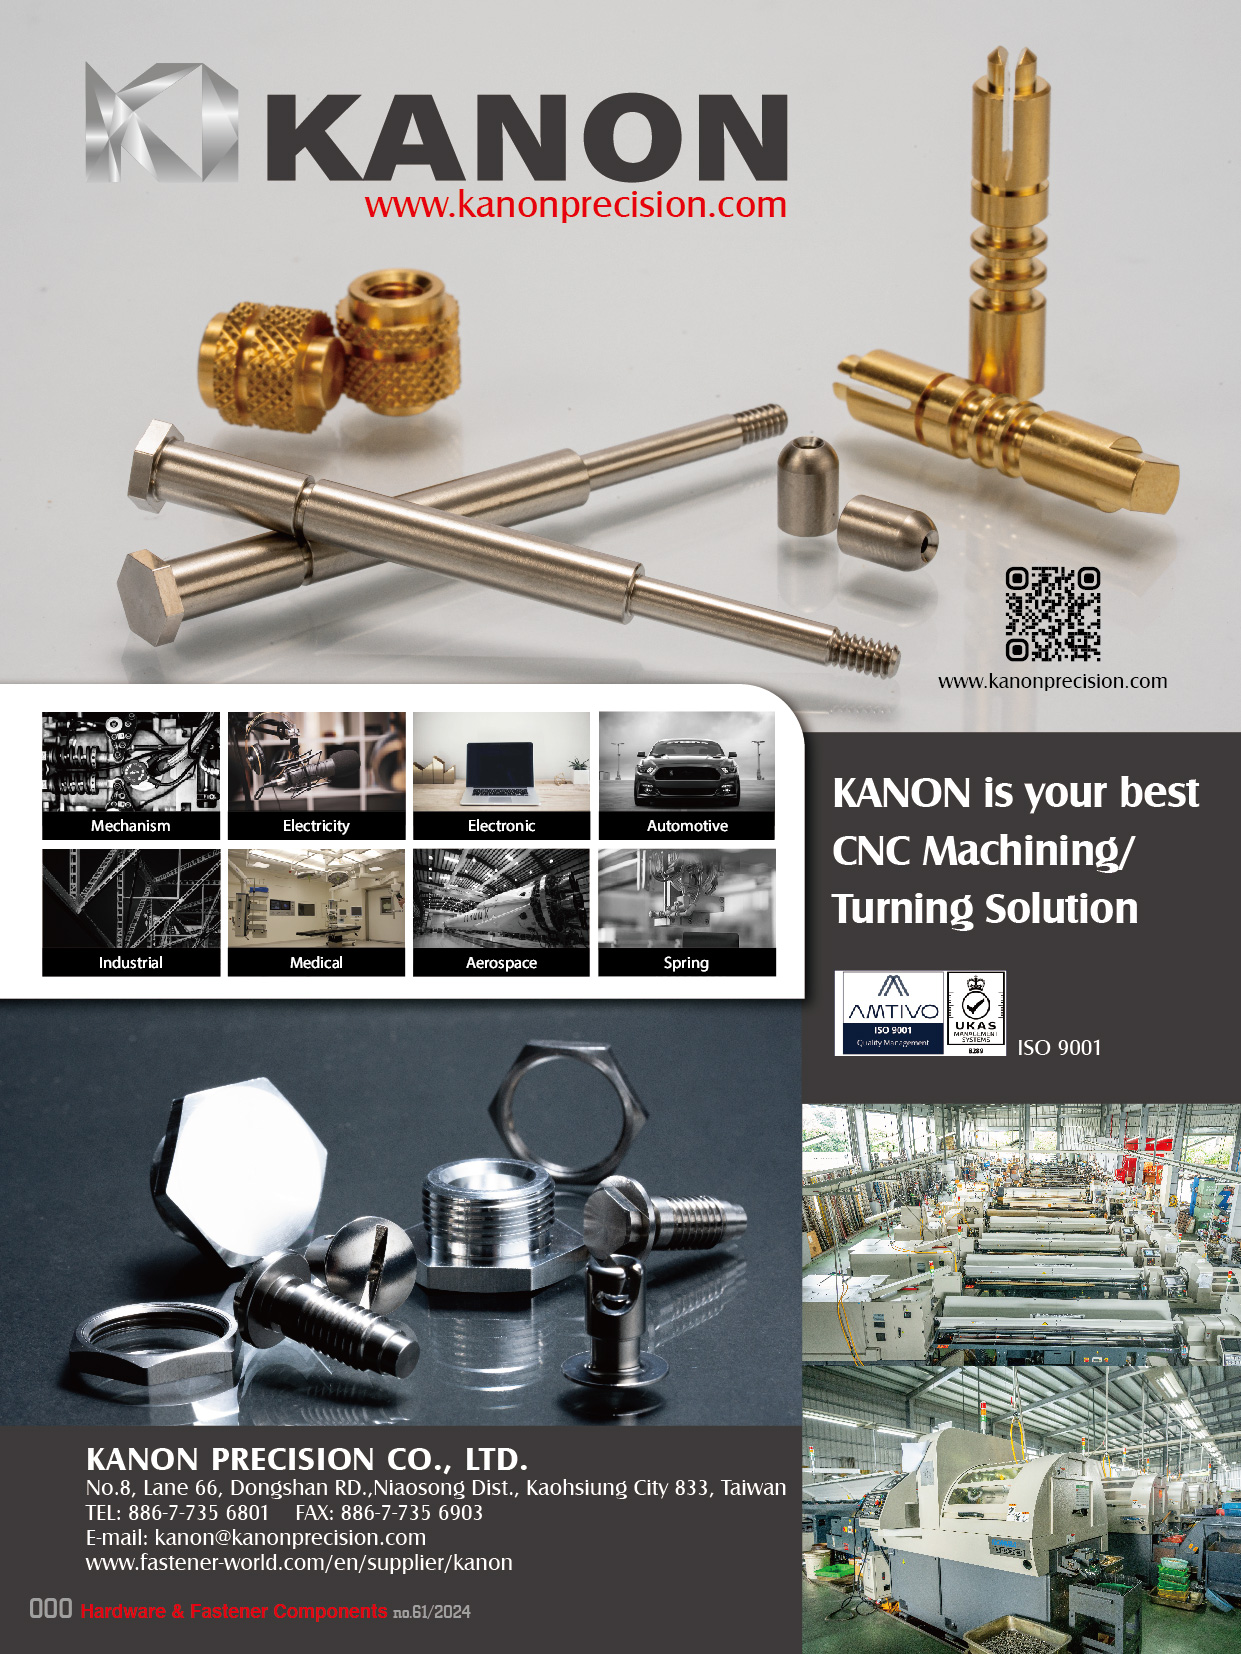 KANON PRECISION CO., LTD.  , TURNING PARTS, MACHINED COMPONENTS, PRECISION TURNED MESICAL PARTS, PRECISION AUTO PARTS, PRECISION MILLING PARTS, PRECISION SHAFT, ELECTRONIC COMPONENTS, CONNECTOR COMPONENTS, CONNECTOR PARTS, CNC PRECISION MILLING PARTS, PRECISION CNC MACHINING PARTS, AUTOMOTIVE TURNING PART, MACHINED PARTS, CNC MILLING, TURNING AND MILLING, PRECISION MACHINE PARTS, FASTENERS, DRAWING PARTS TURNING WORK,THREADED INSERT, BRASS INSERT, BAR TURNING MACHINING